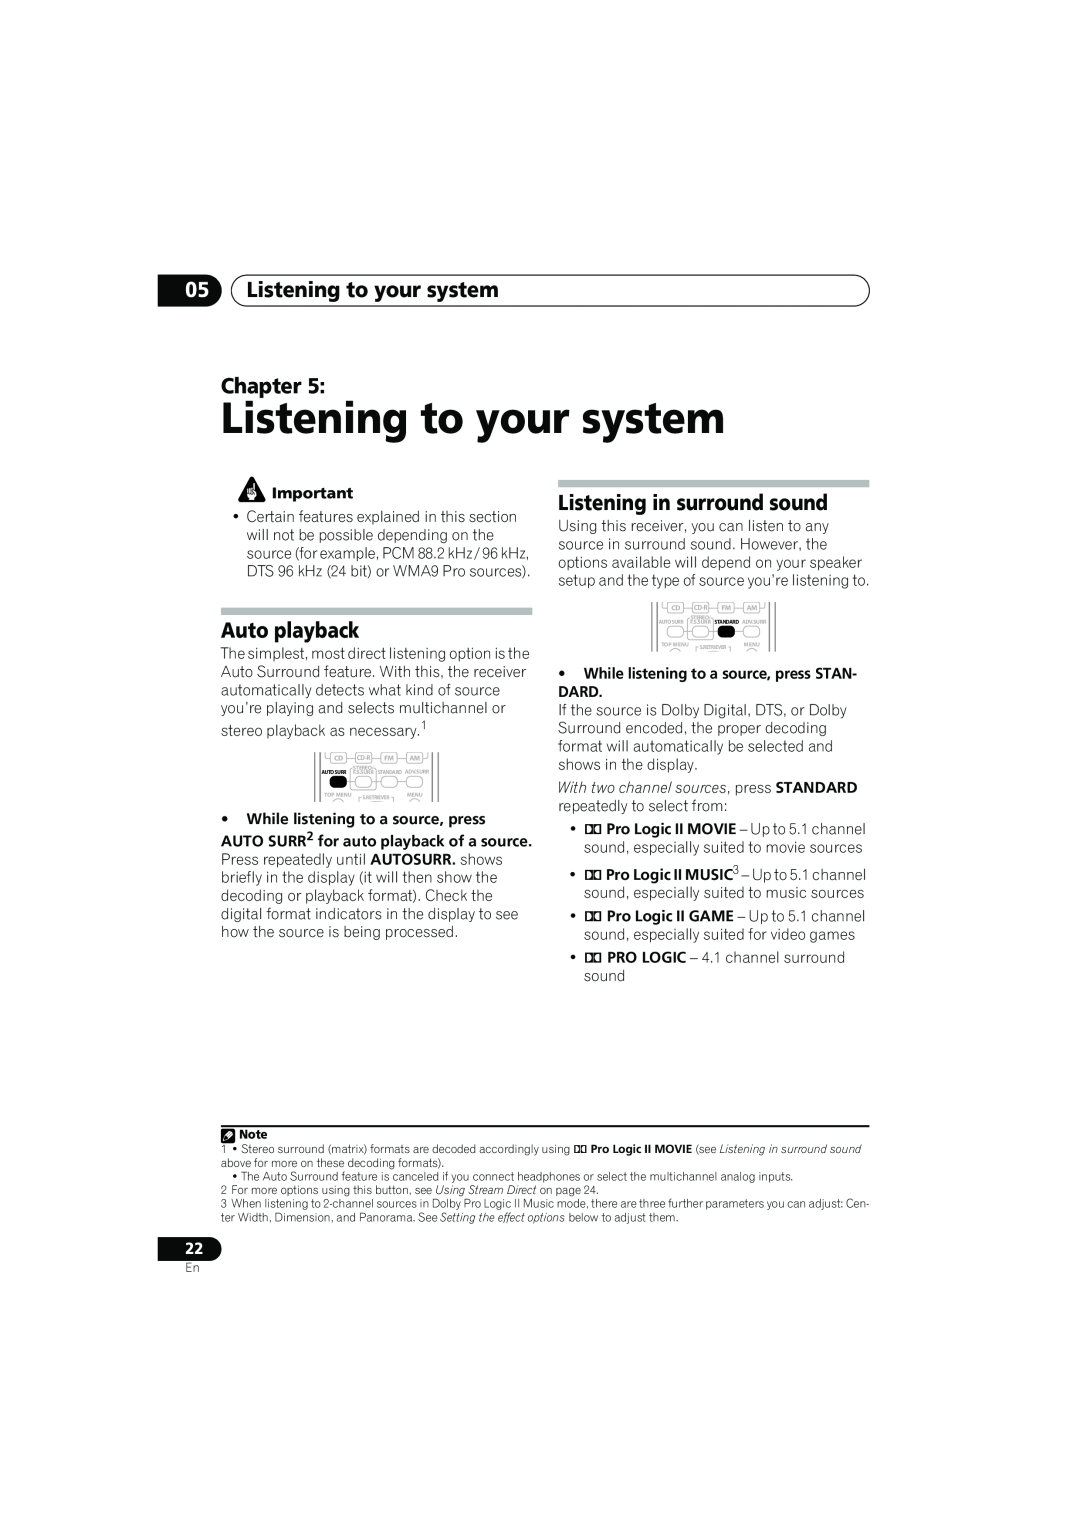 Pioneer XRE3138-A manual 05Listening to your system Chapter, Listening in surround sound, Auto playback 